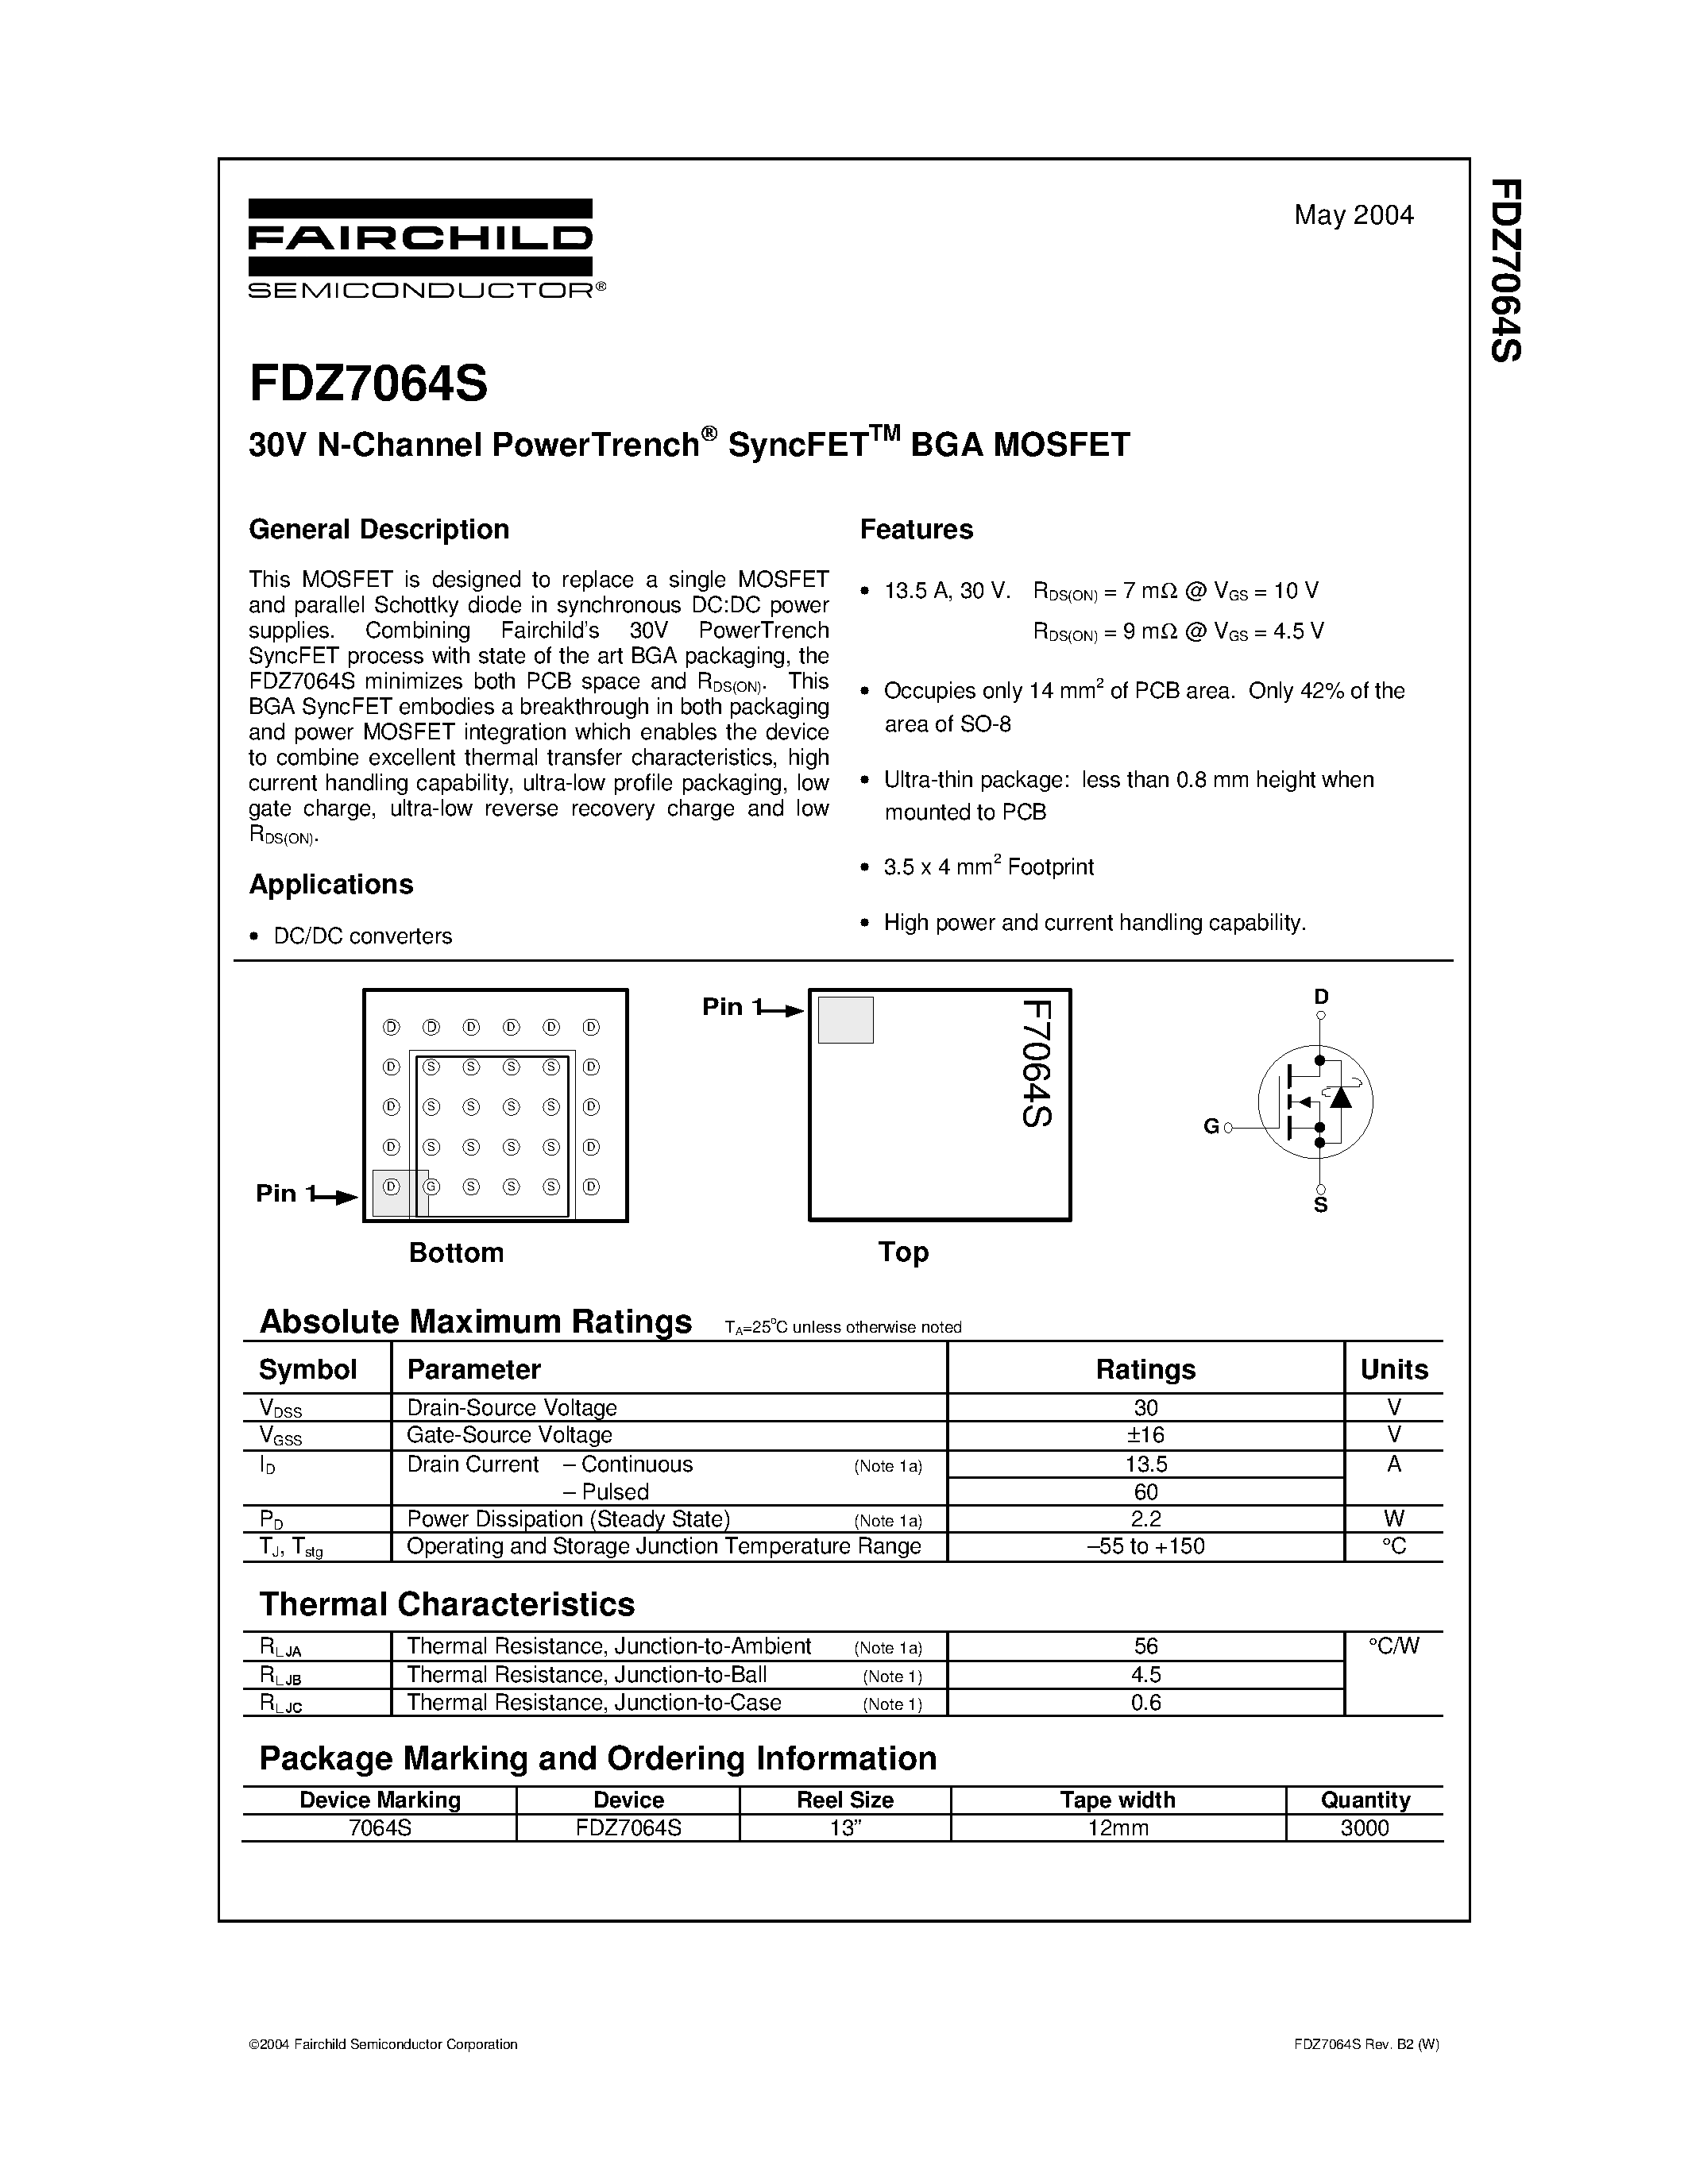 Даташит FDZ7064S - 30V N-Channel PowerTrench SyncFET BGA MOSFET страница 1